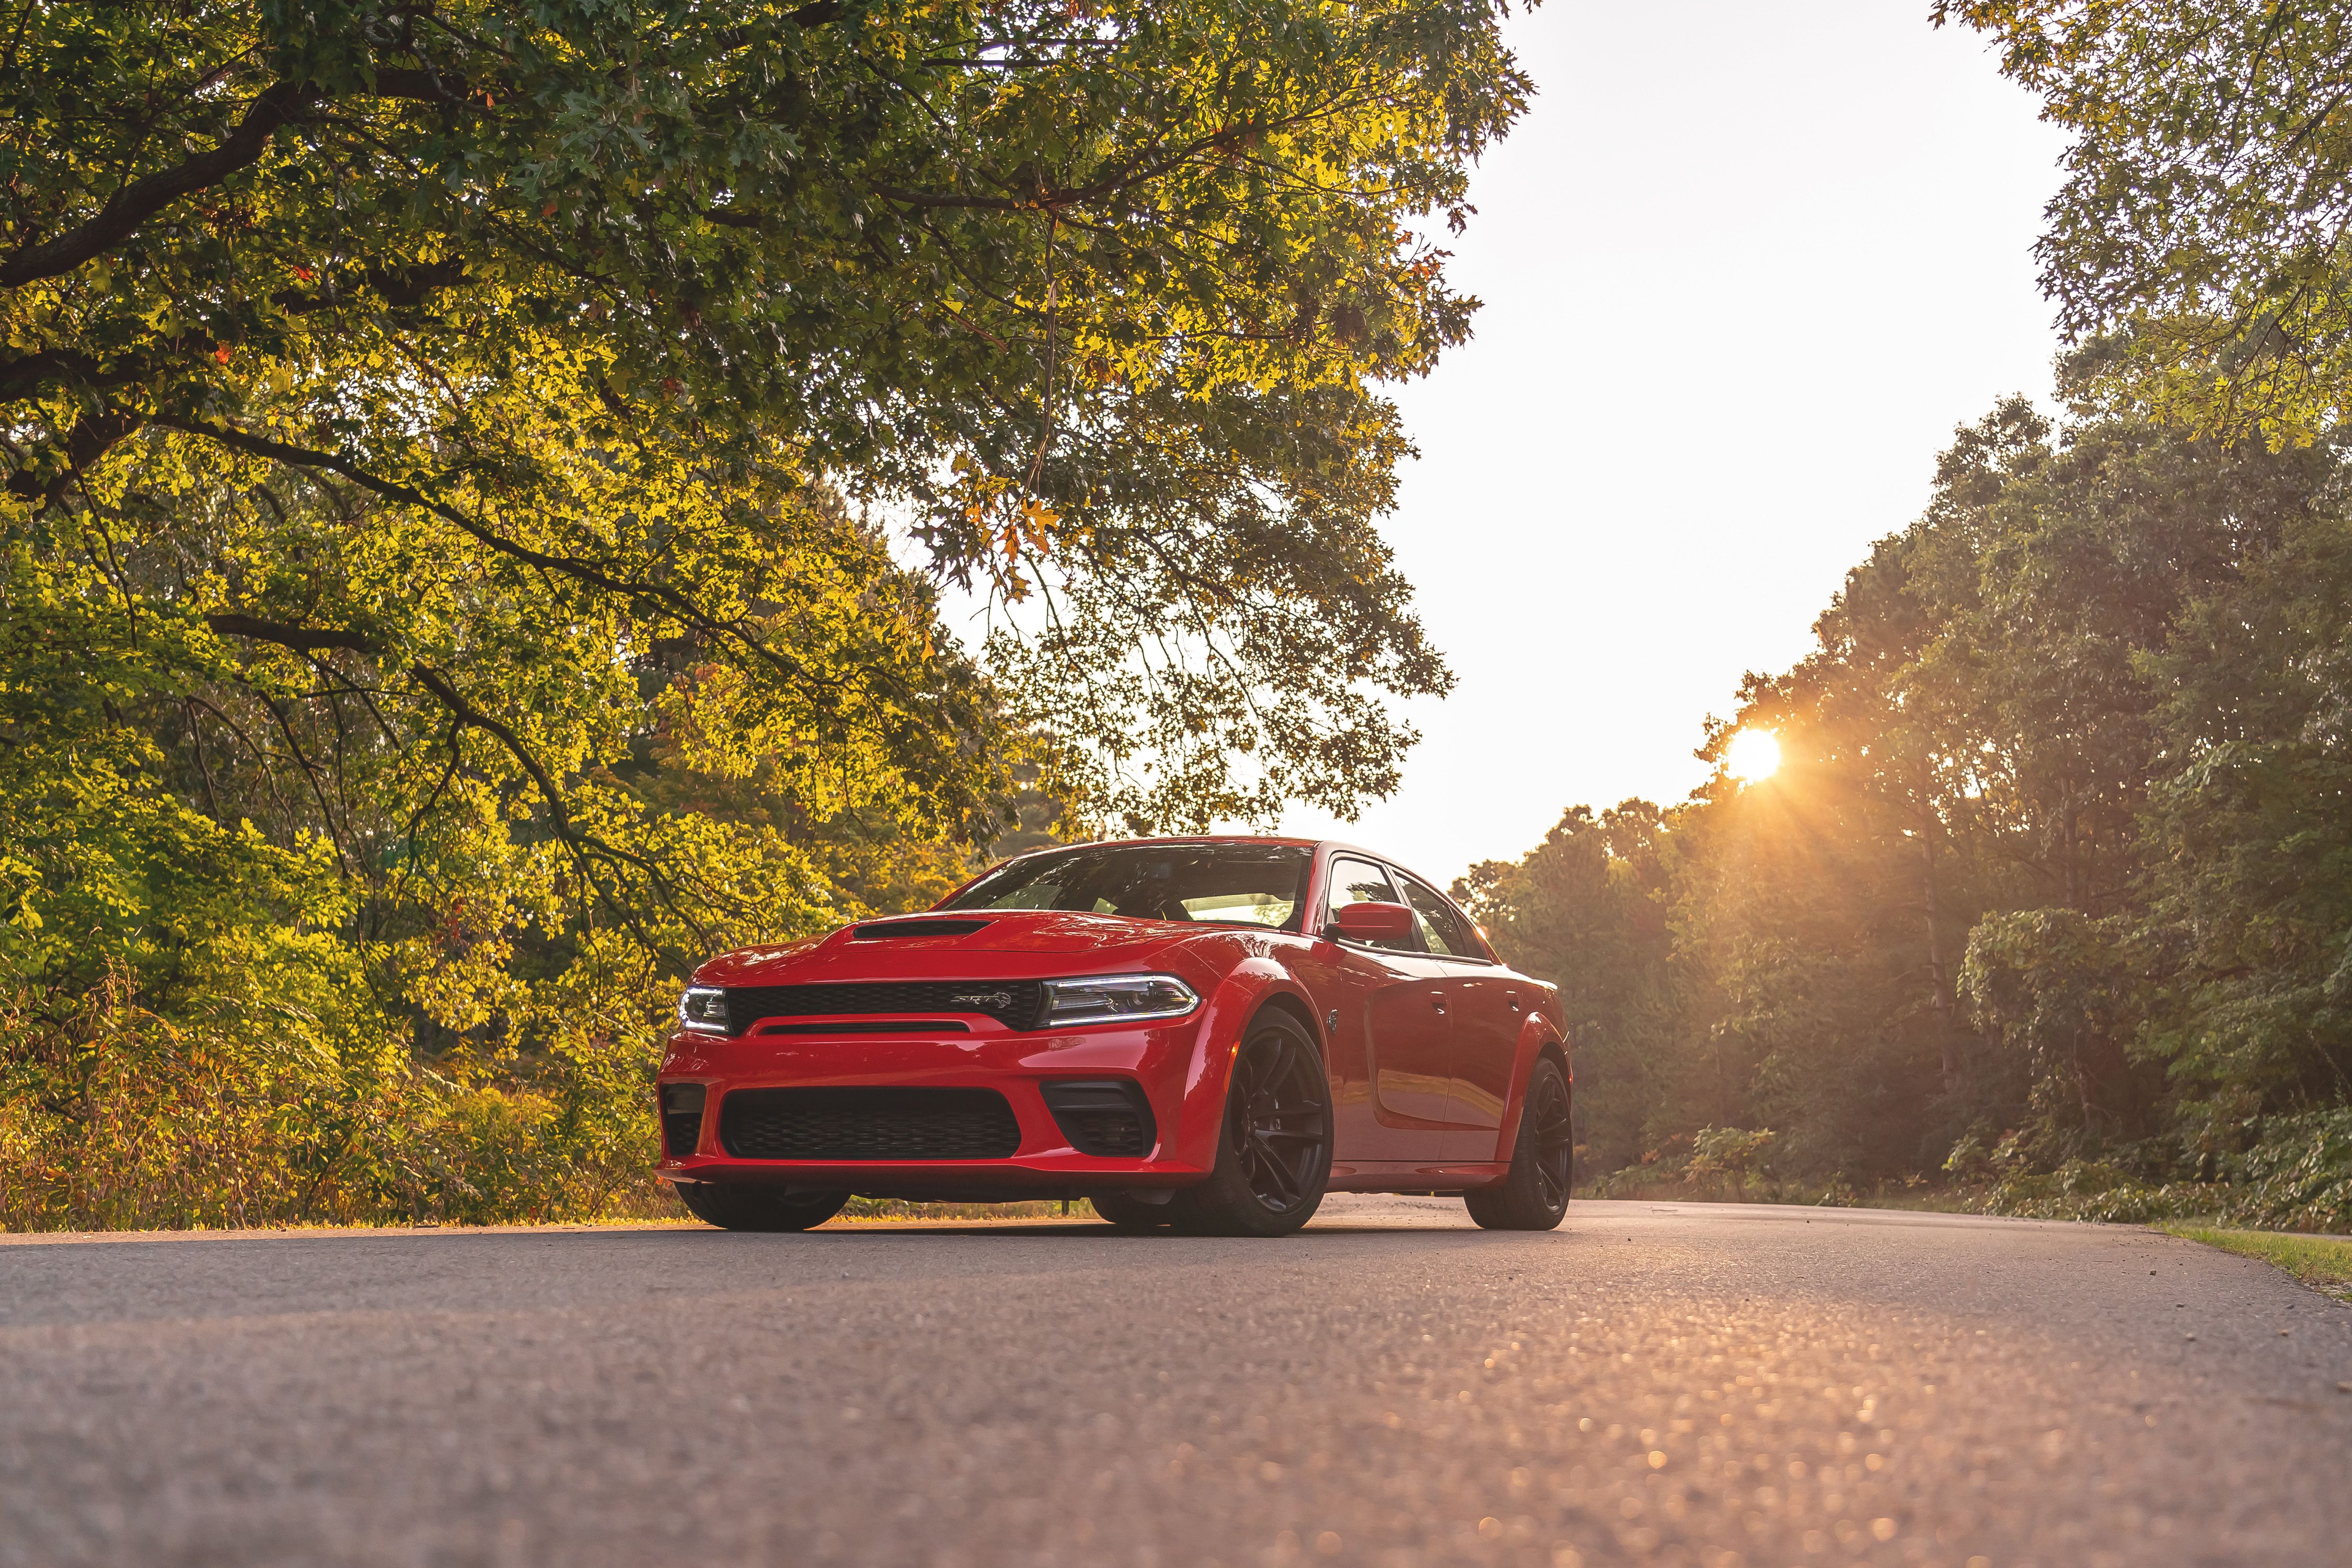 2021 Dodge Charger SRT Hellcat Redeye Widebody  Wallpapers and HD Images   Car Pixel